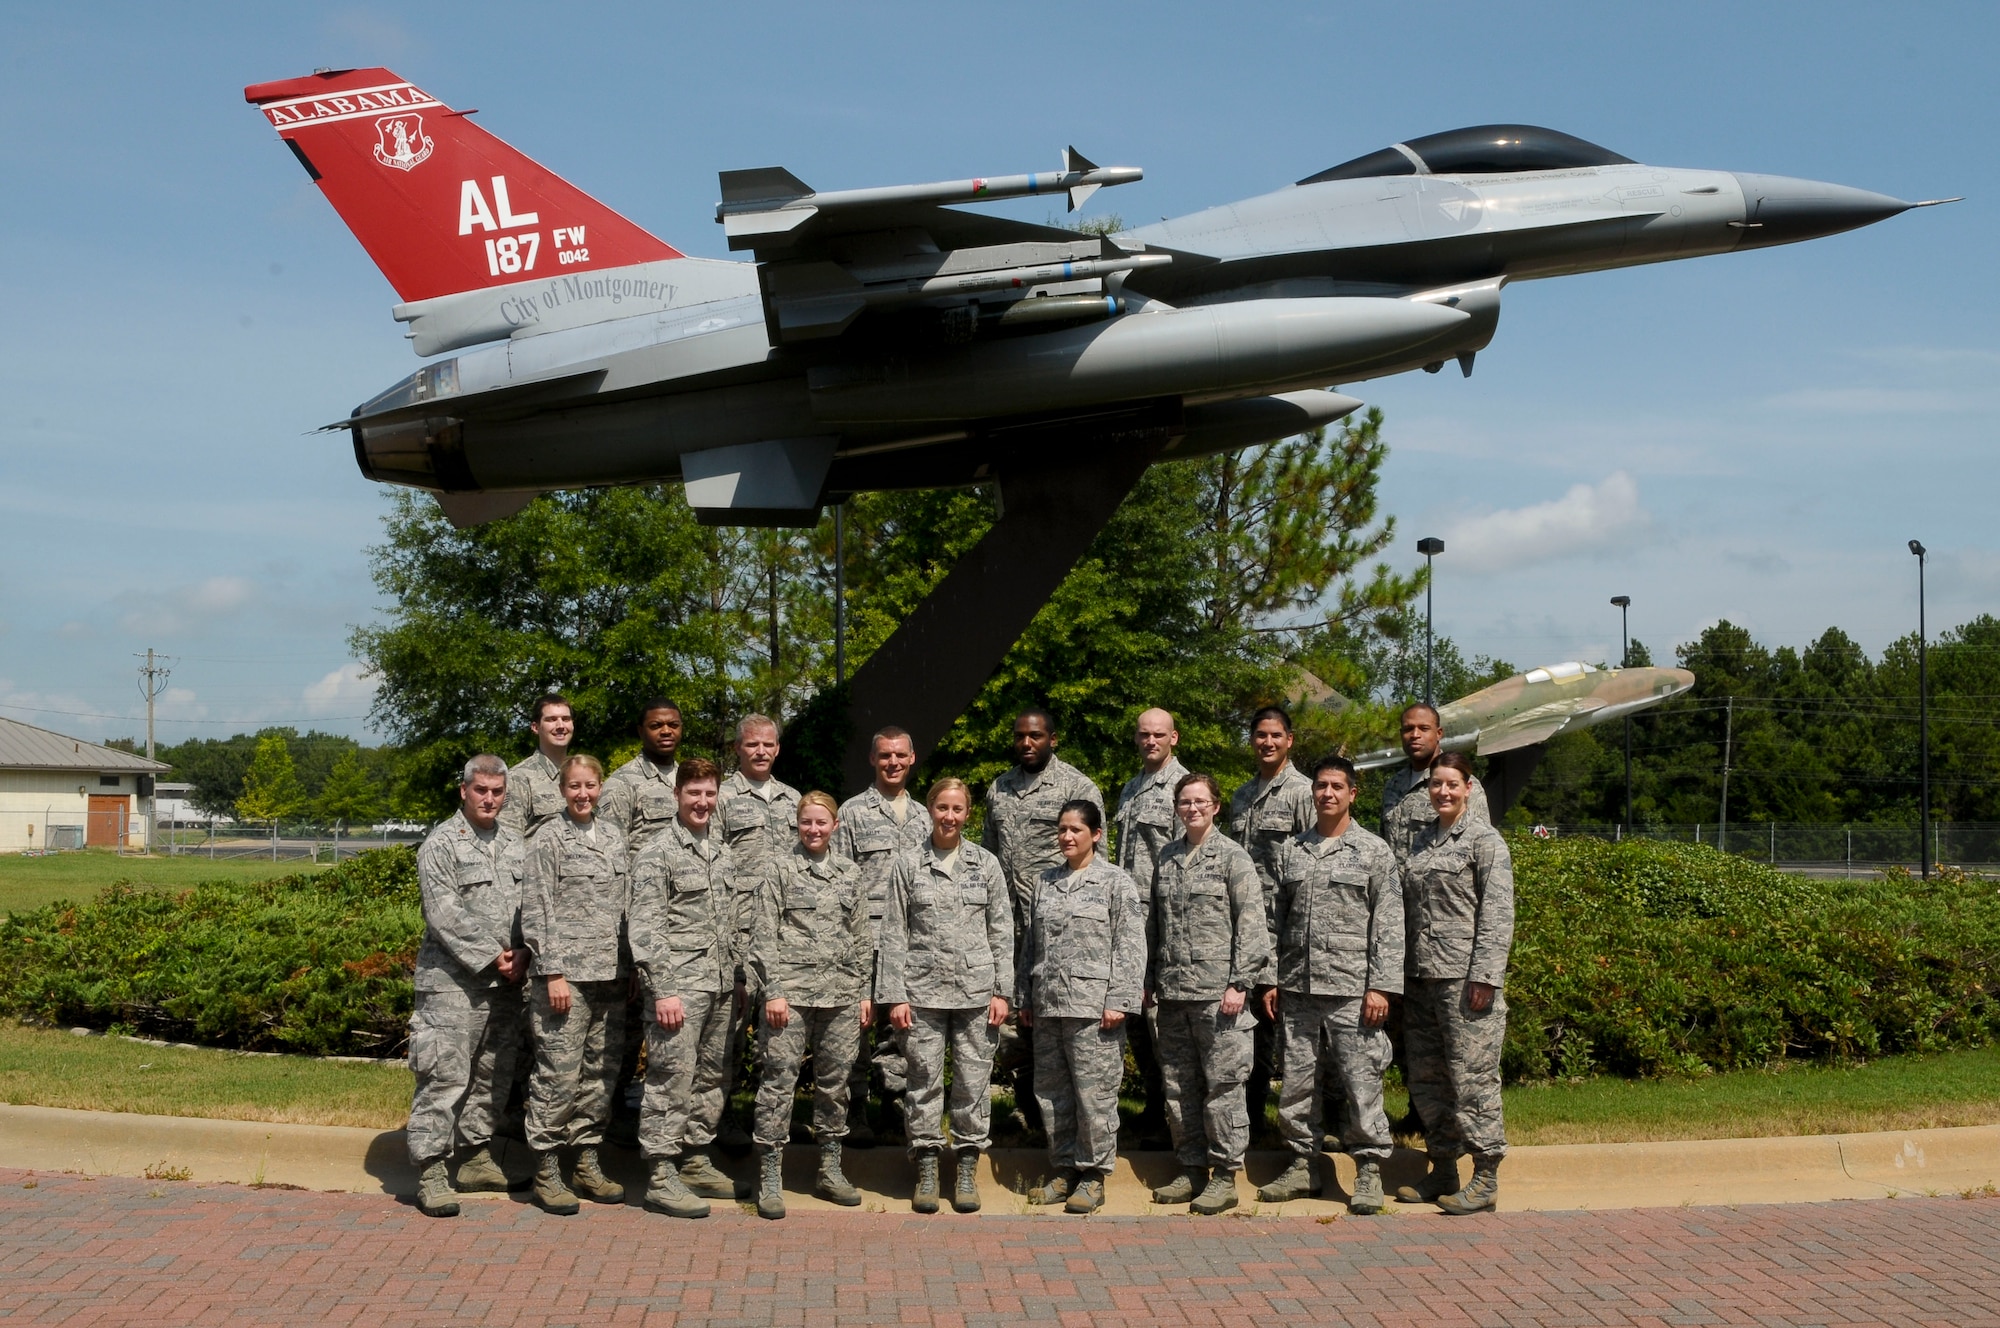 Intelligence personnel from seven different Air National Guard bases attend the first ever 12 day F-16 Intelligence Fighter Training Unit class at the 187th Fighter Wing, Montgomery, Ala. on Aug. 21, 2015. The F-16 IFTU course is designed to train intelligence personnel how the different Air Force weapons systems integrate into the F-16 in order to effectively operate in combat. (U.S. Air Force photo by Tech. Sgt. Matthew Garrett\Released)